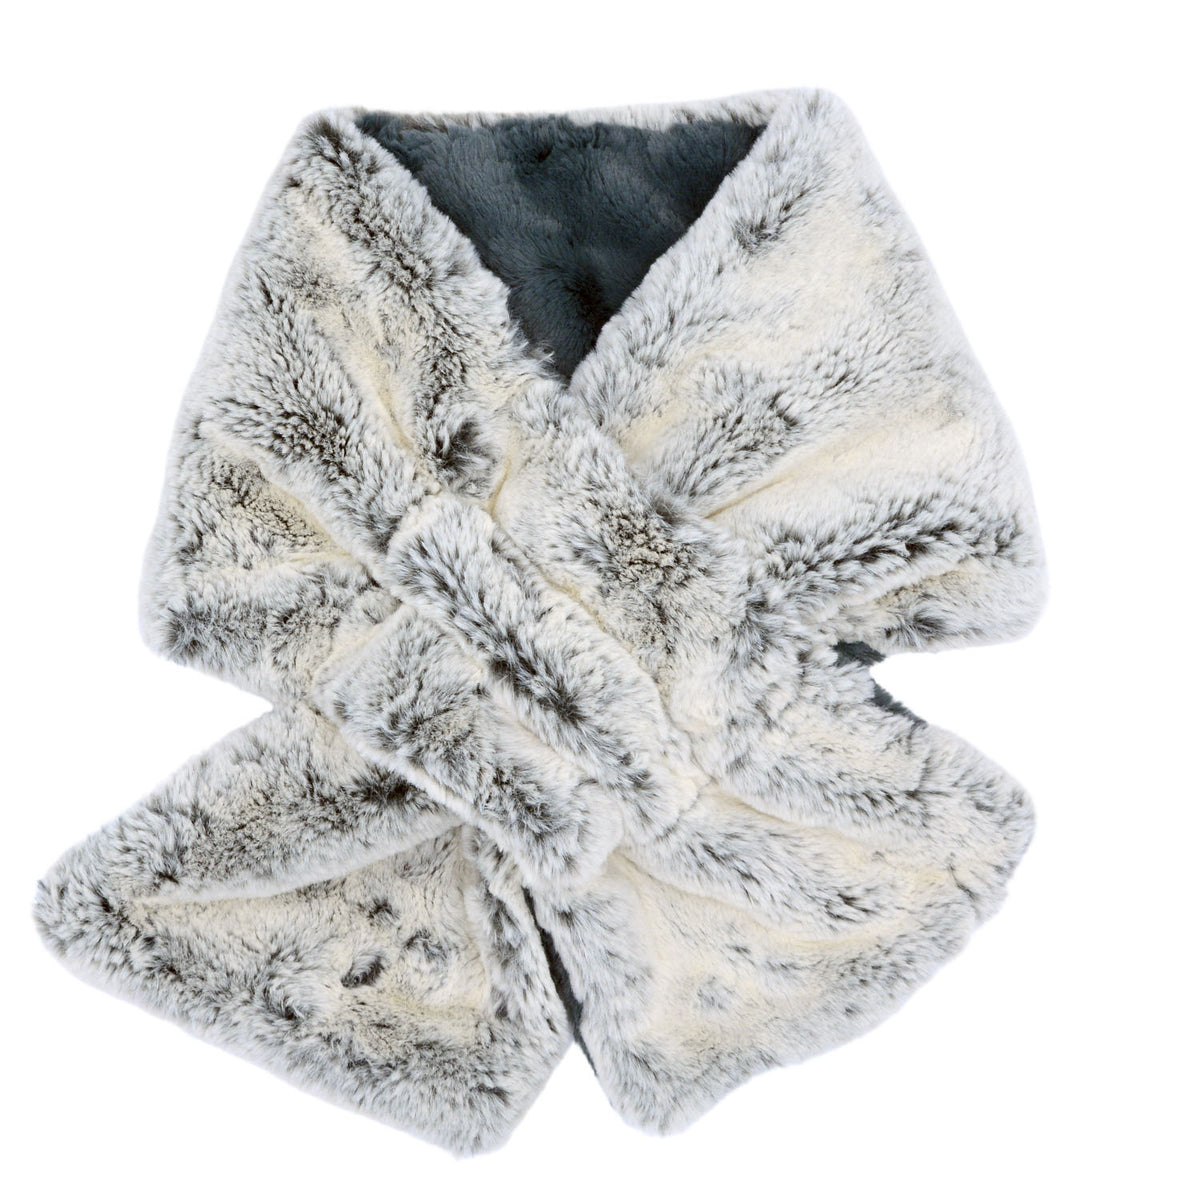 Pull-Thru Scarf | Frosted Juniper Faux Fur | Handmade USA by Pandemonium Seattle